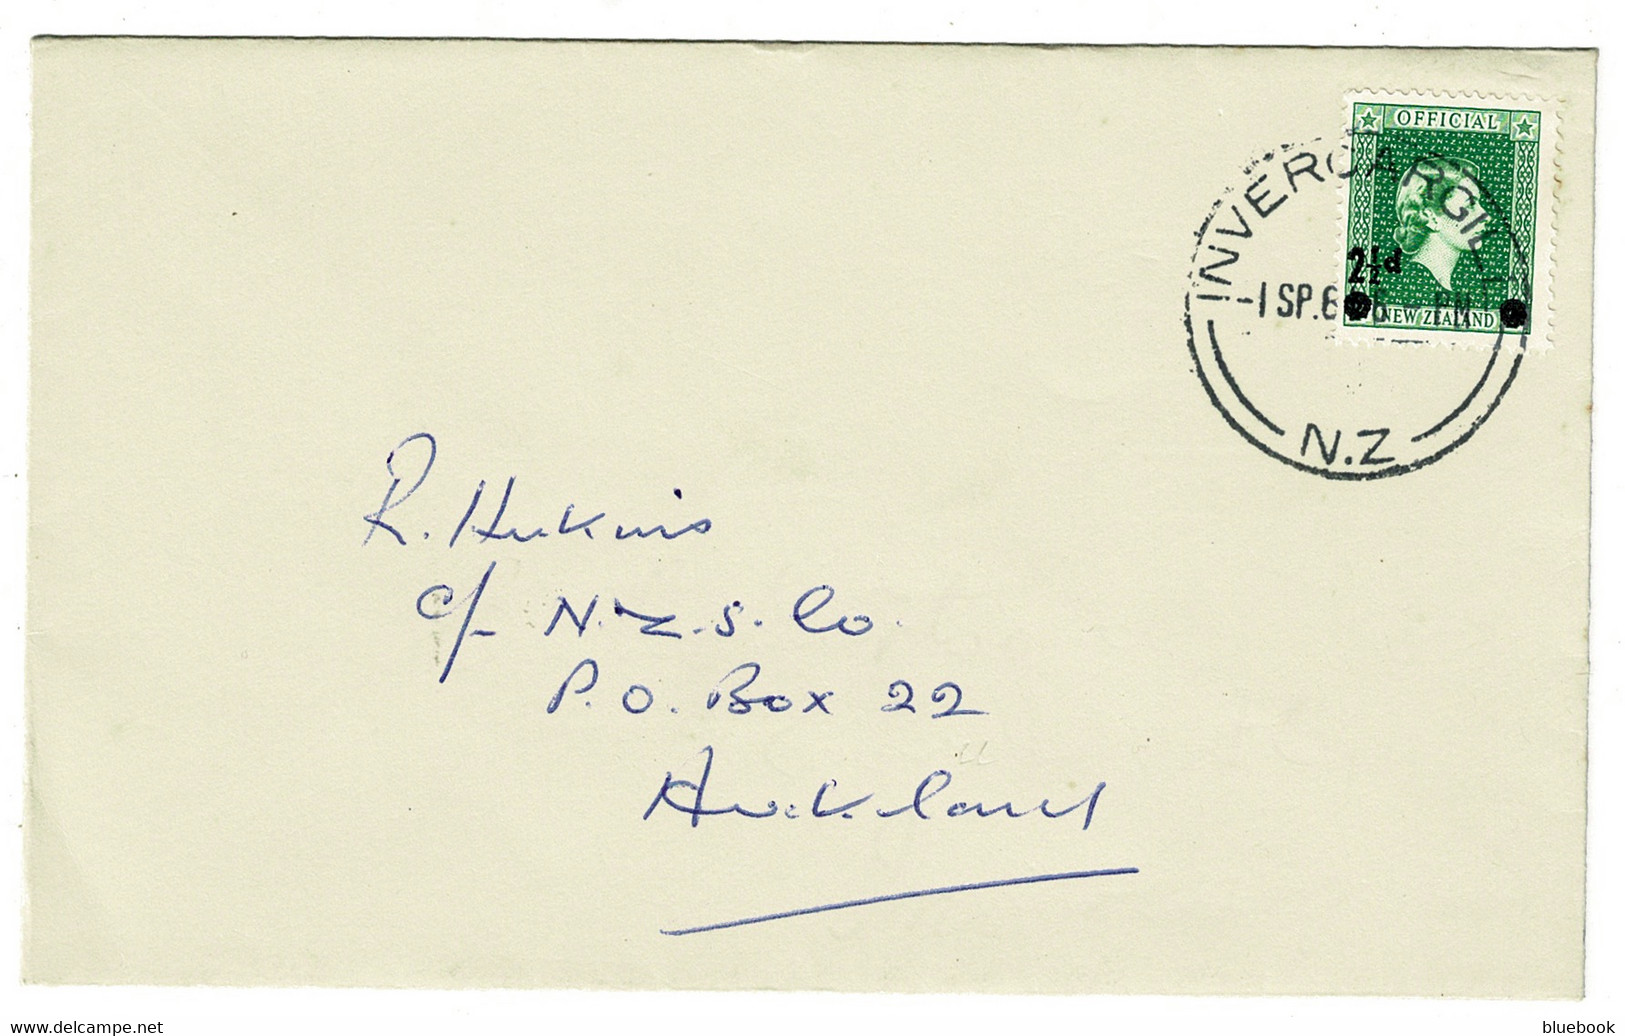 Ref 1553 -  1961 New Zealand FDC First Day Cover - 2 1/2d Official Opt - Invercargill Cancel - Private Use Of Official - Lettres & Documents